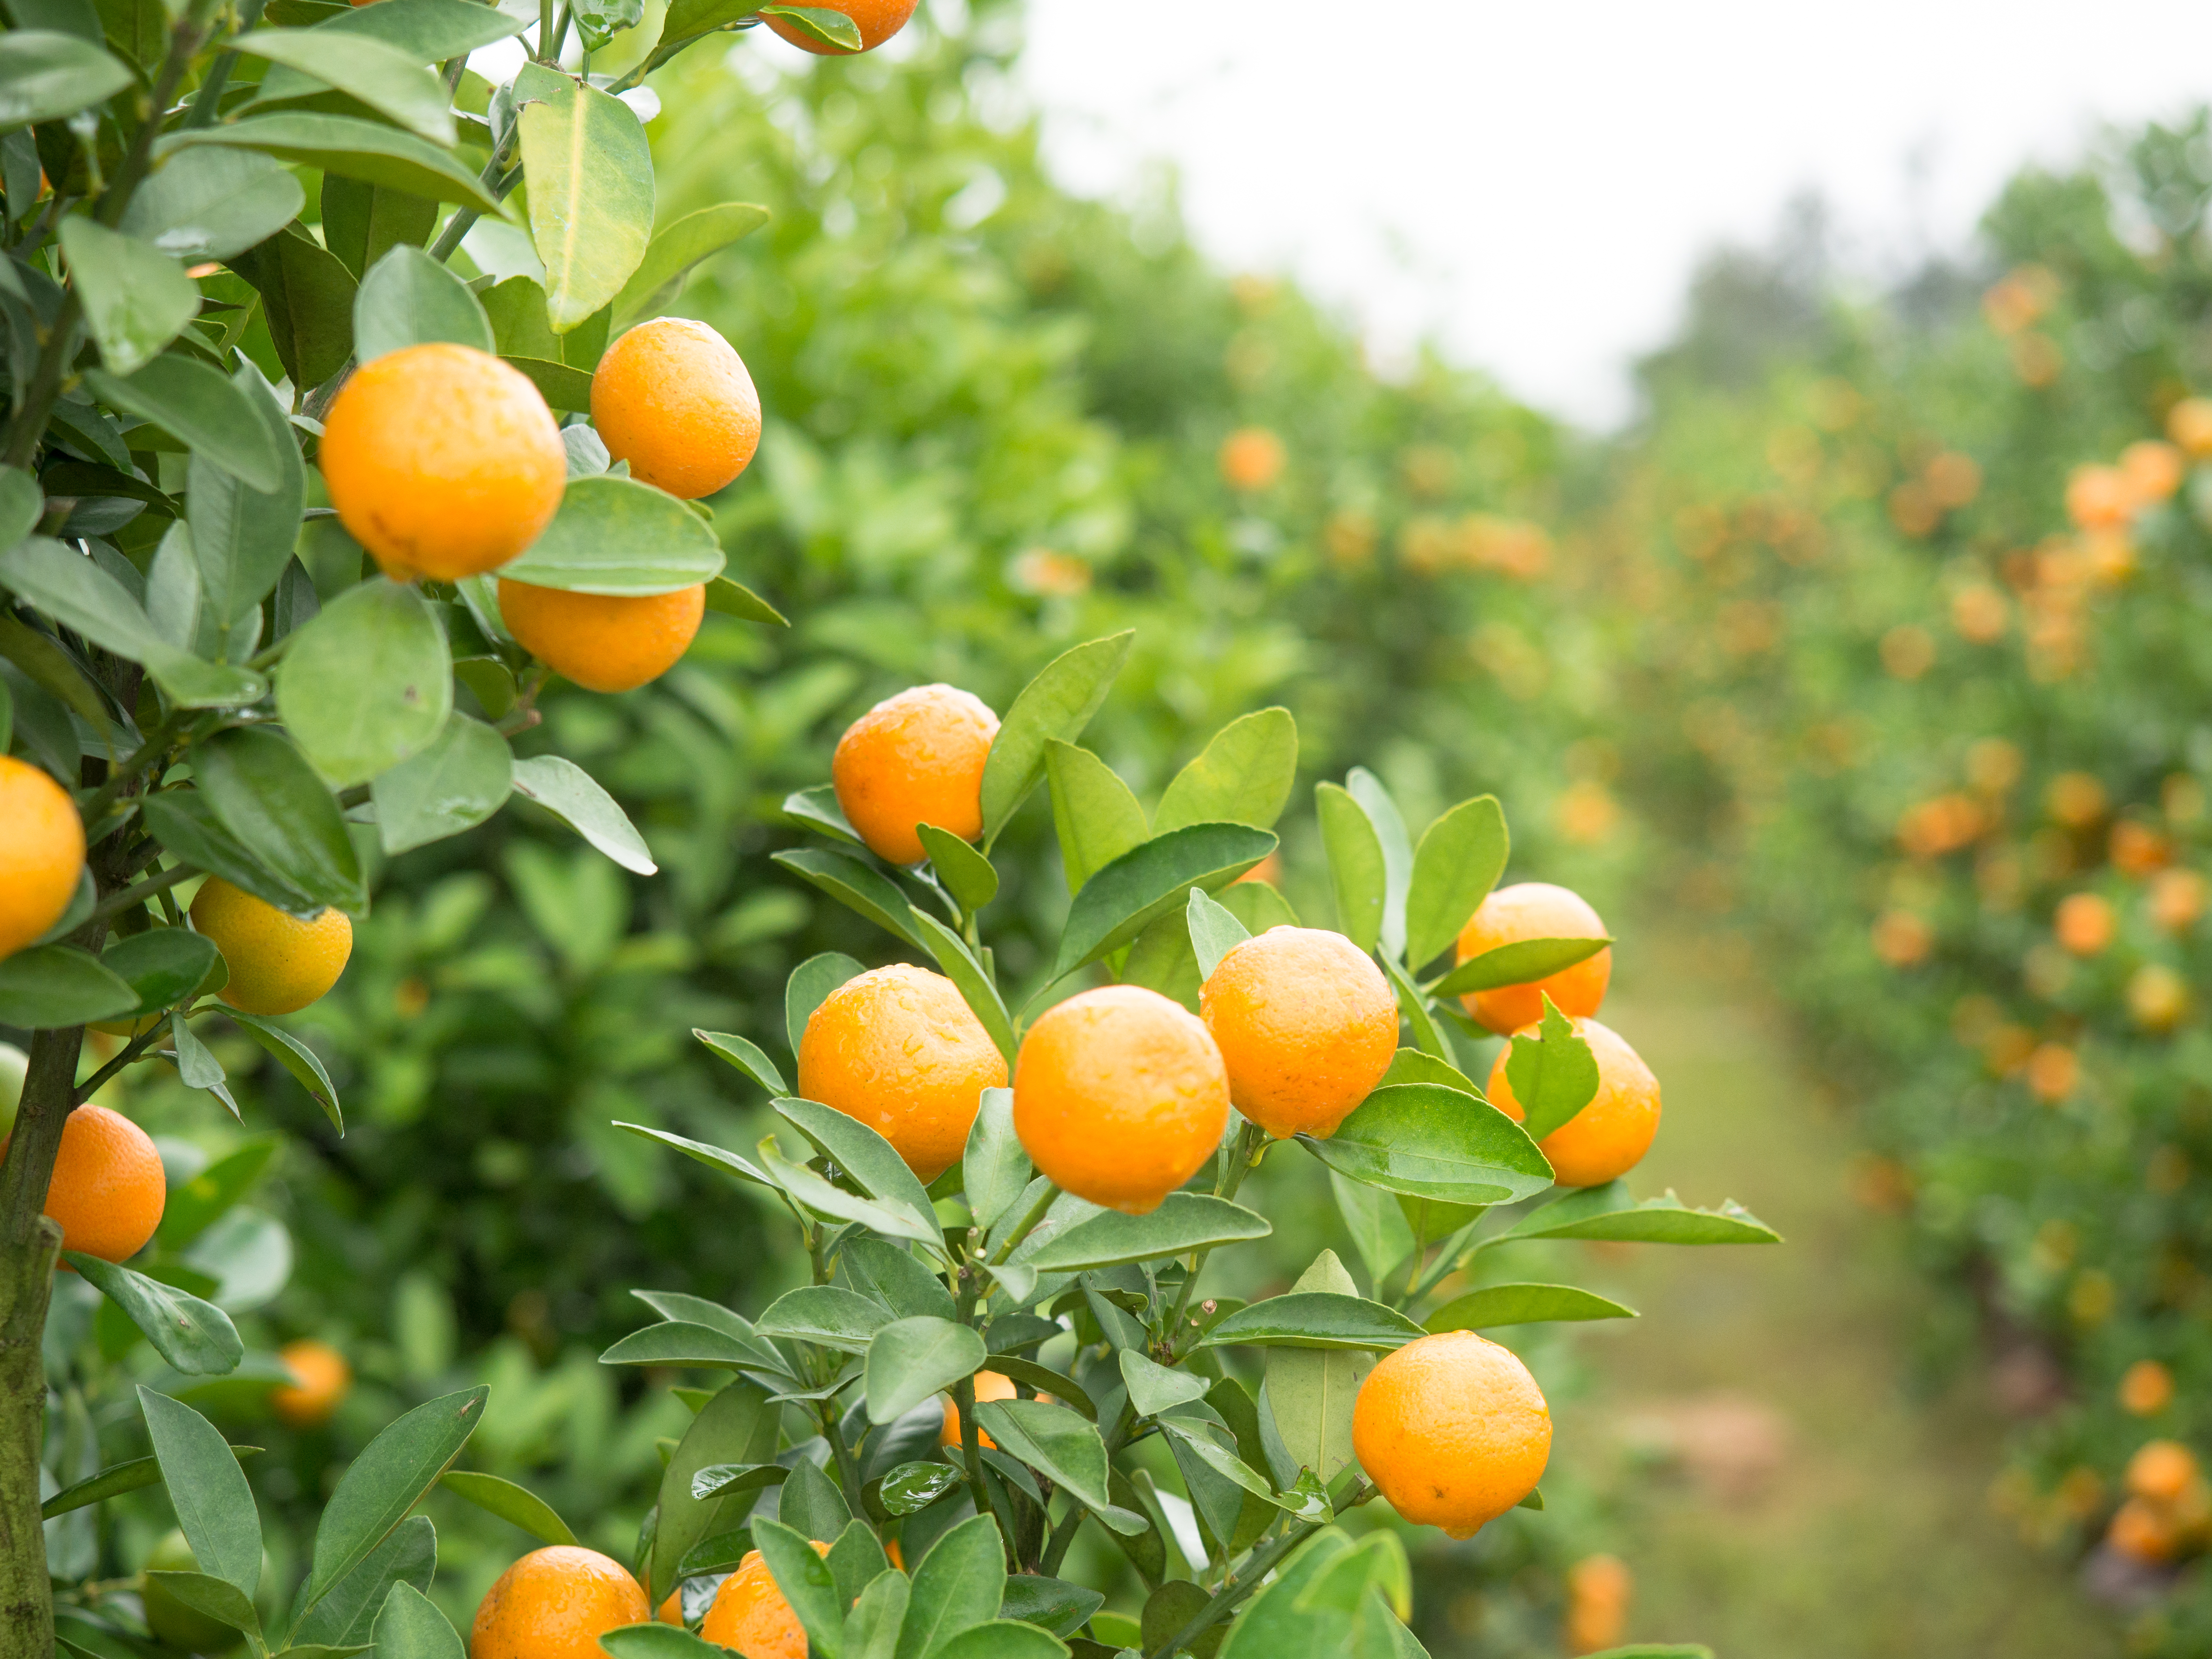 hunter fruit tree agro branch bitter basf agricultural tangerines citrus foliage solutions